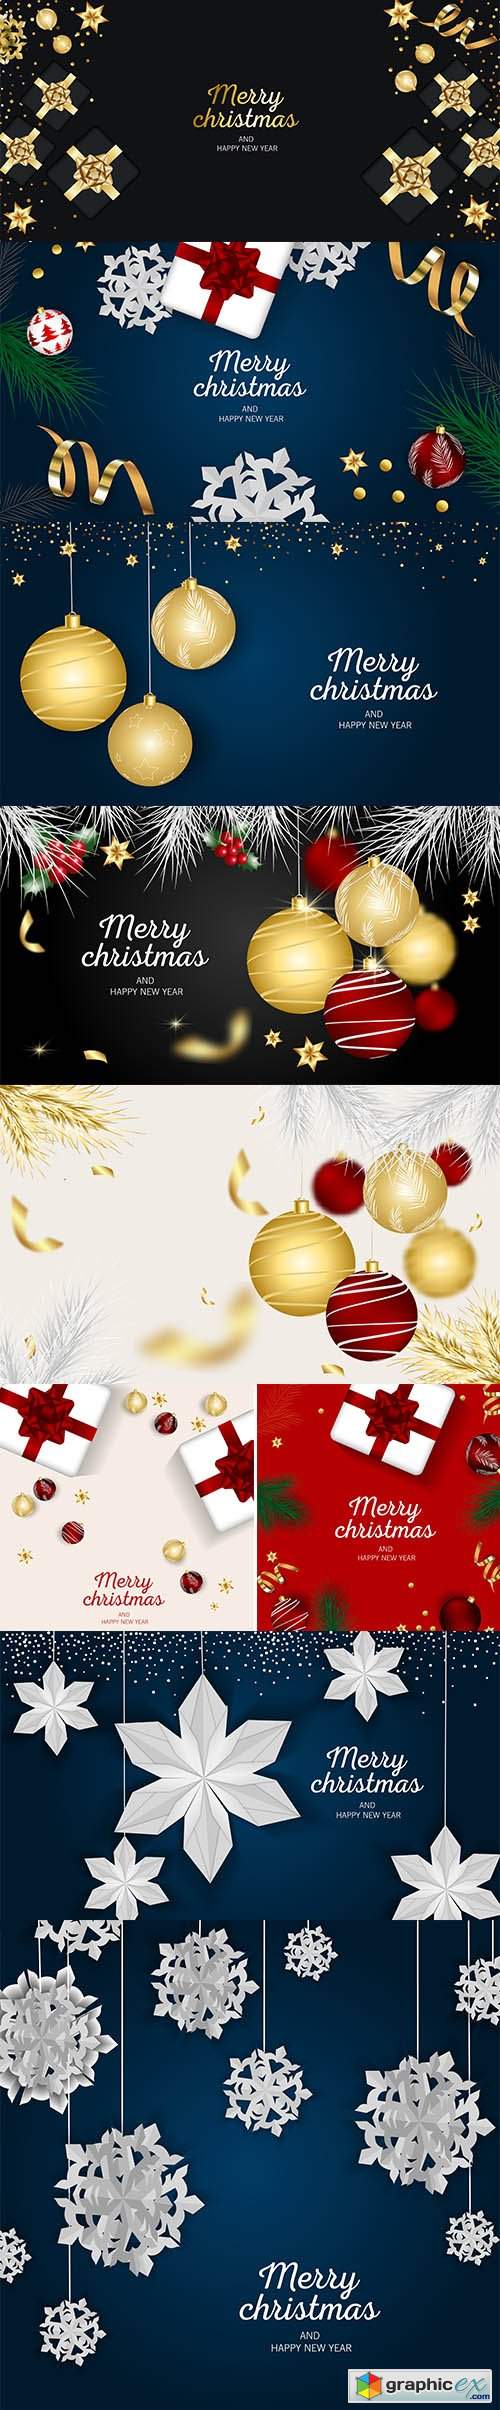  Merry christmas and happy new year greeting with festive christmas balls 